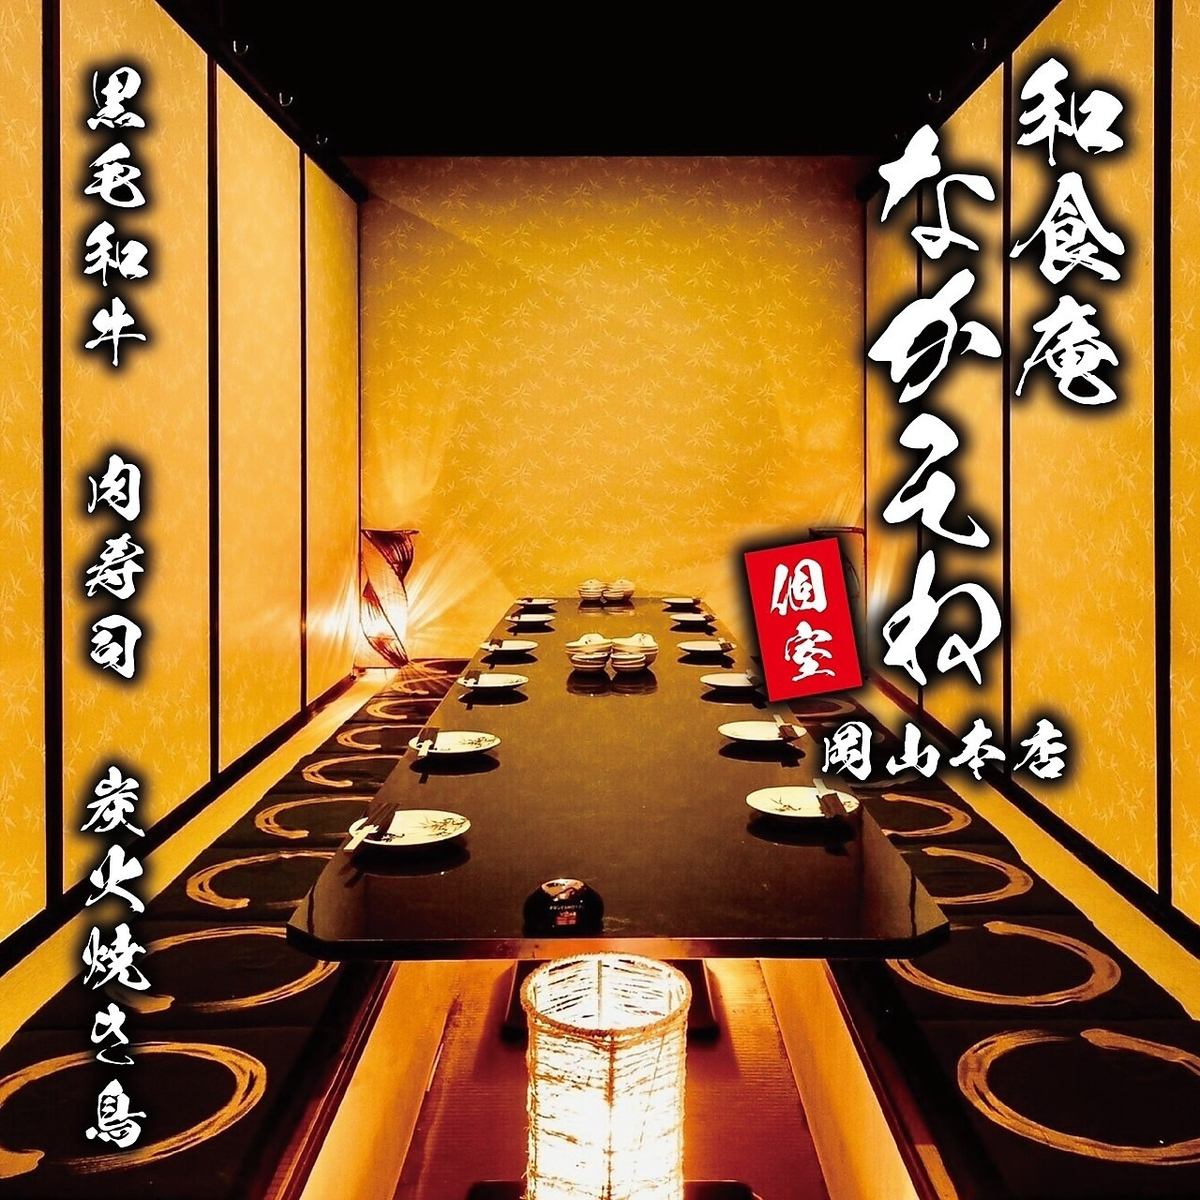 ★ NEW OPEN at Okayama Station ☆ Enjoy a completely private room and Japanese regional cuisine prepared by a first-class chef ♪